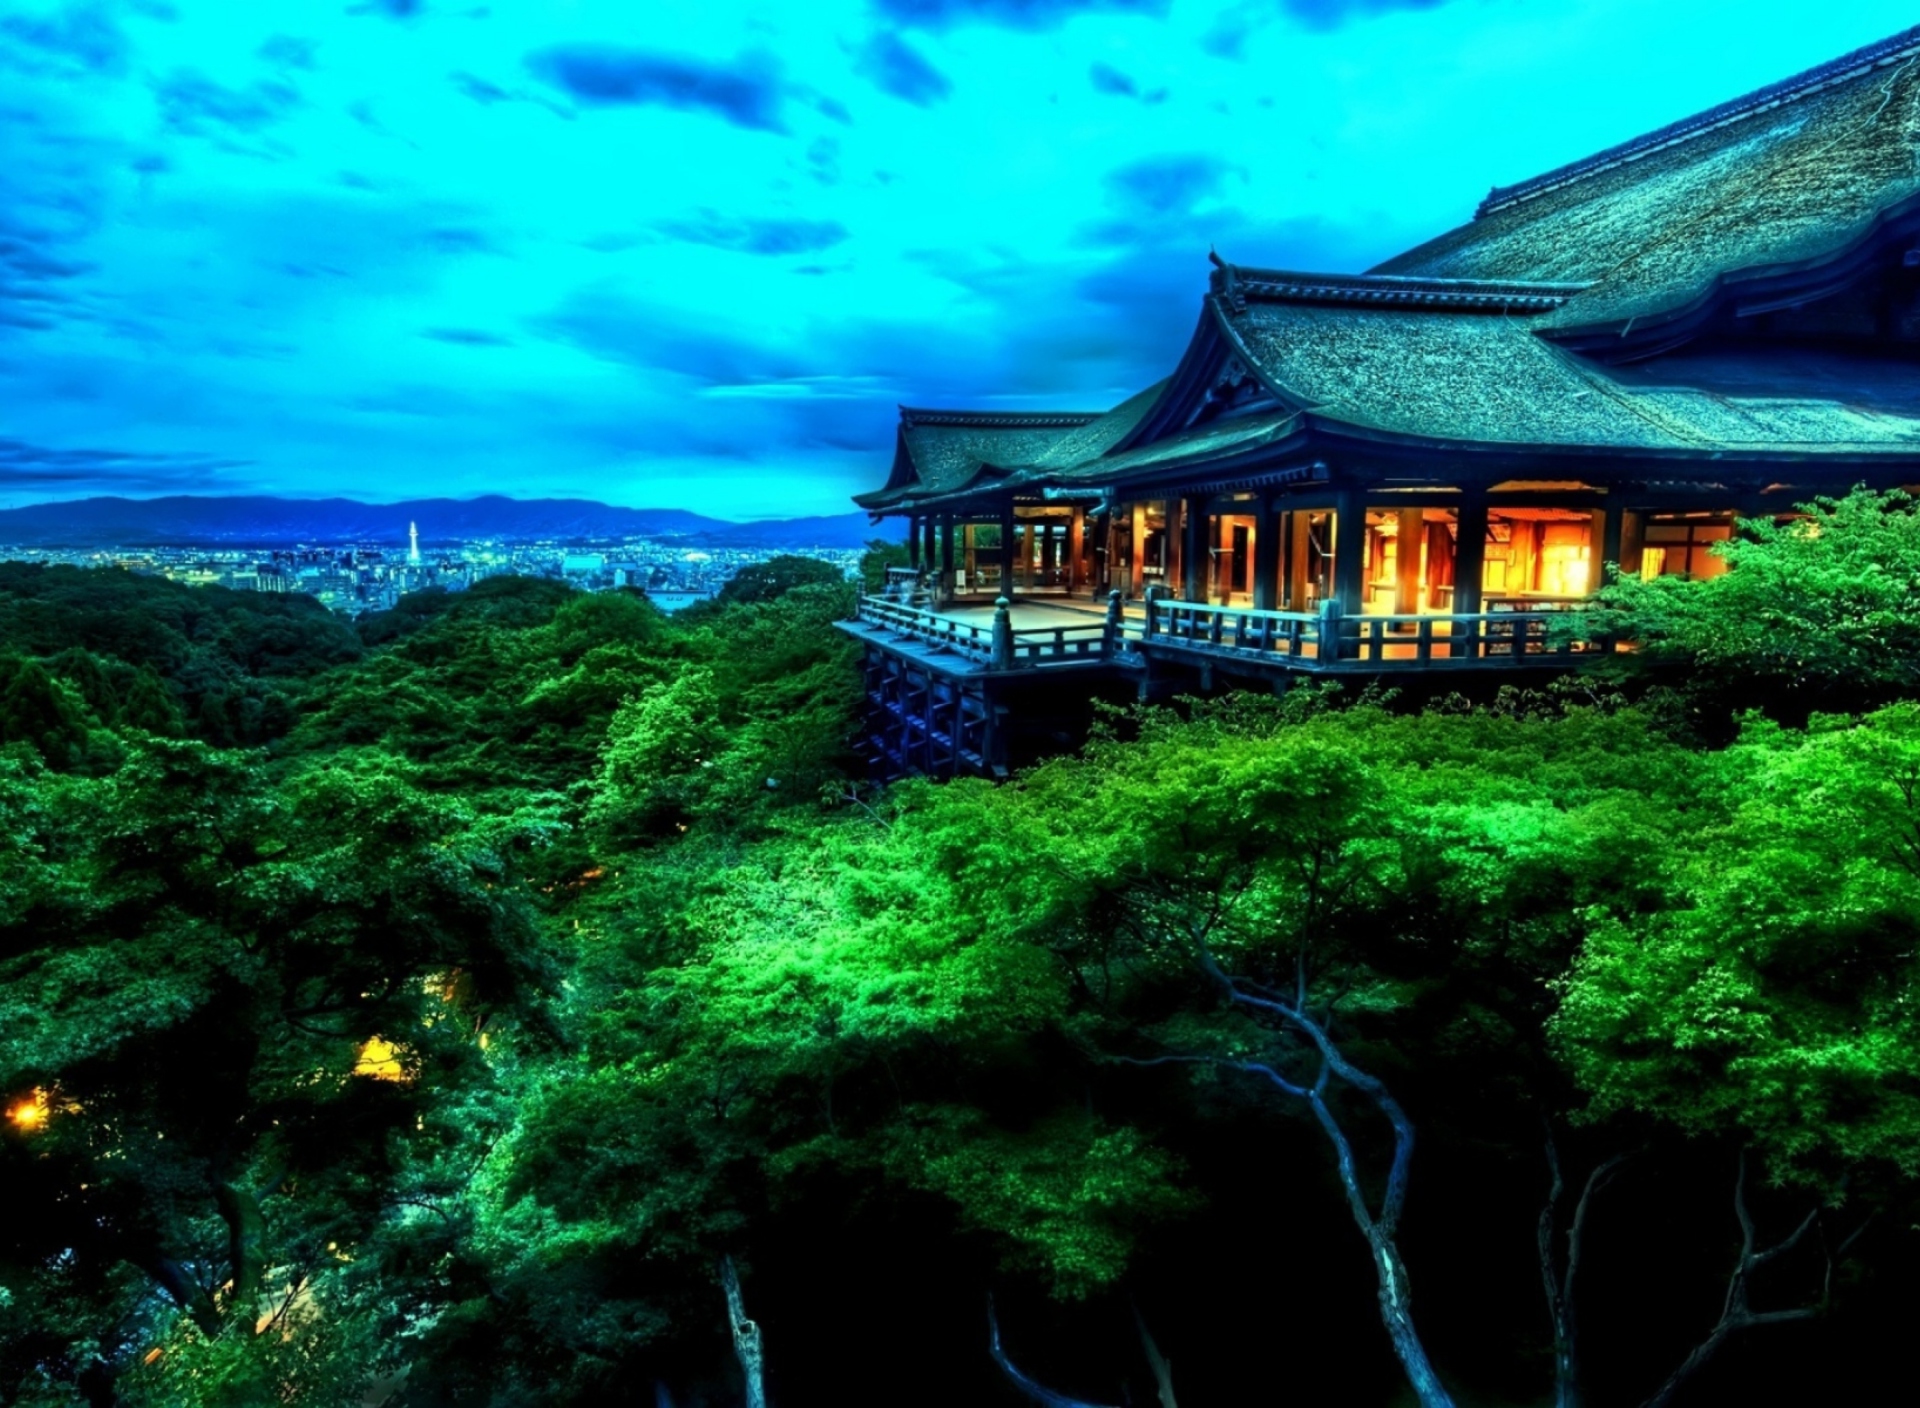 Temple Over Green Trees wallpaper 1920x1408